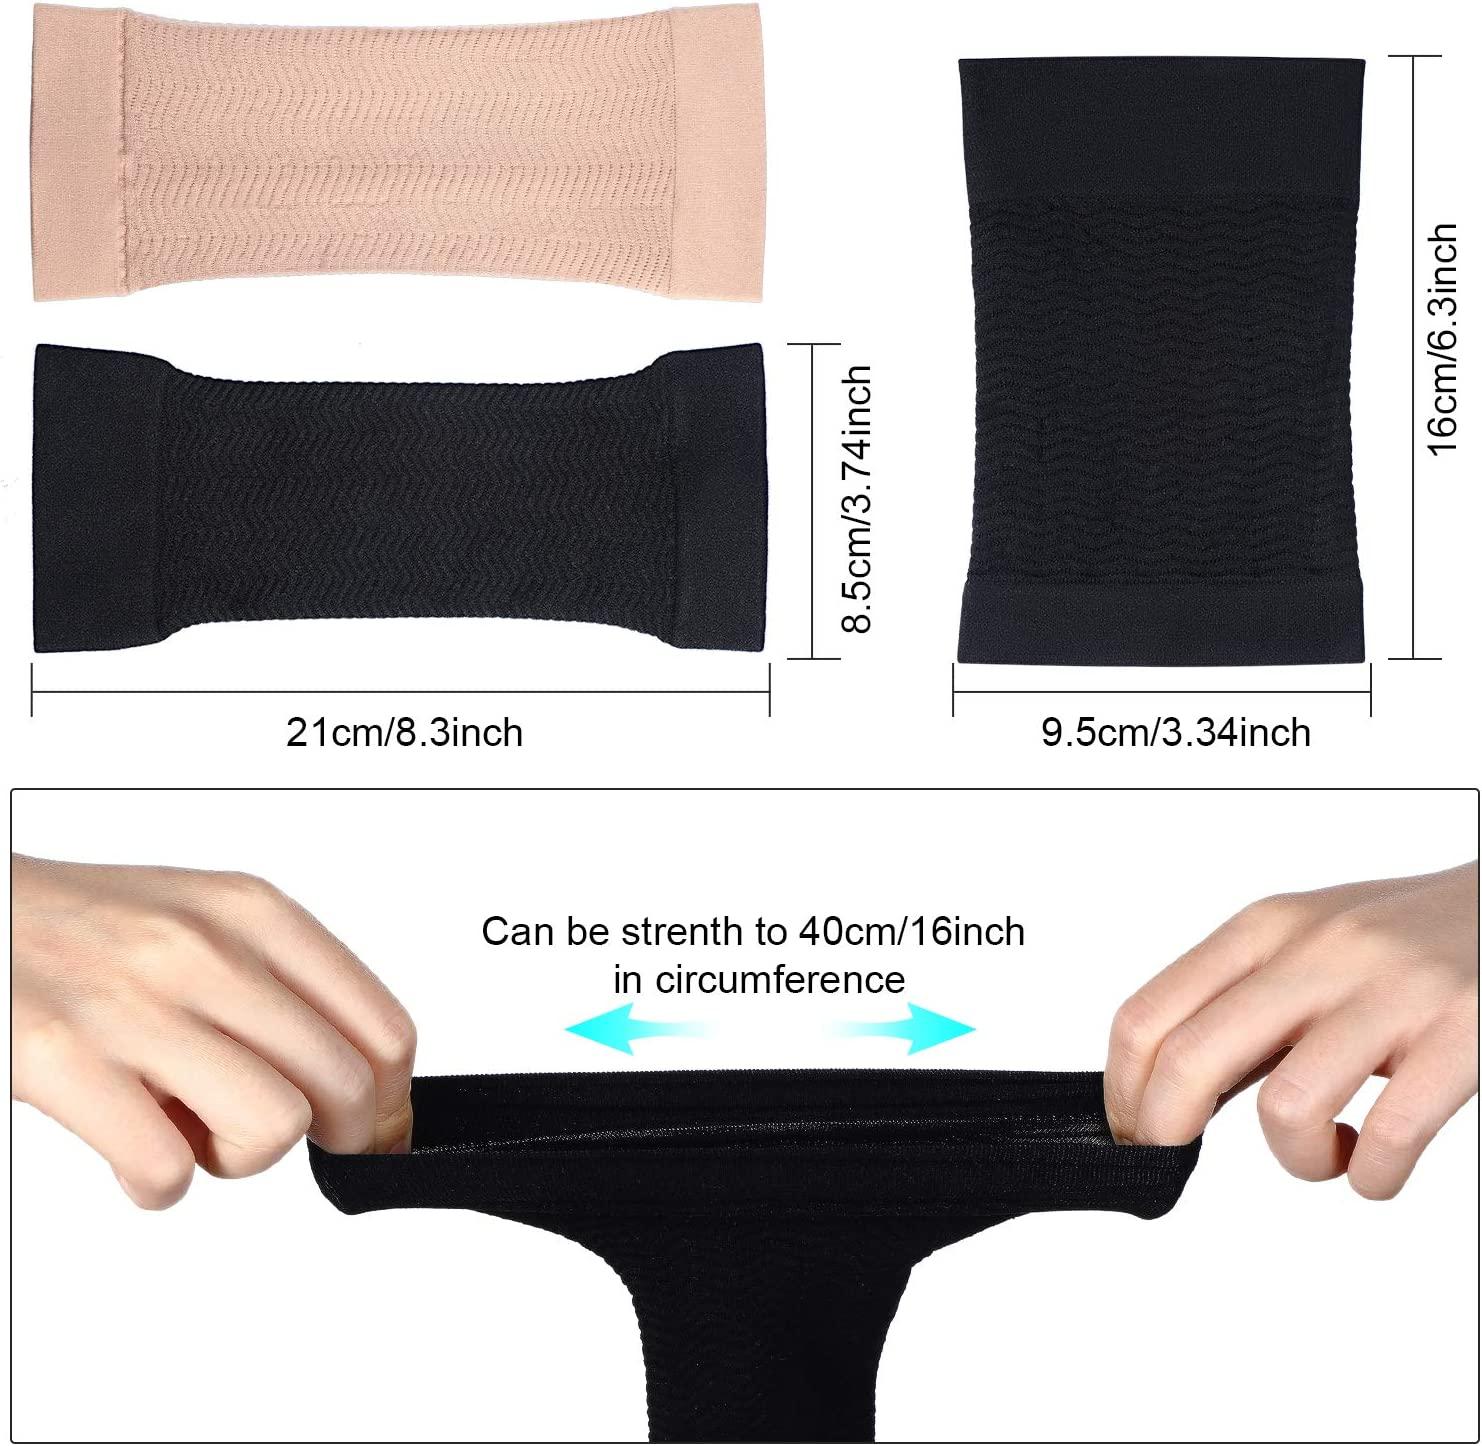 2 Pair Arm Slimming Shaper Wrap, Arm Compression Sleeve Women Weight Loss Upper  Arm Shaper Helps Tone Shape Upper Arms Sleeve for Women - Black :  : Health & Personal Care